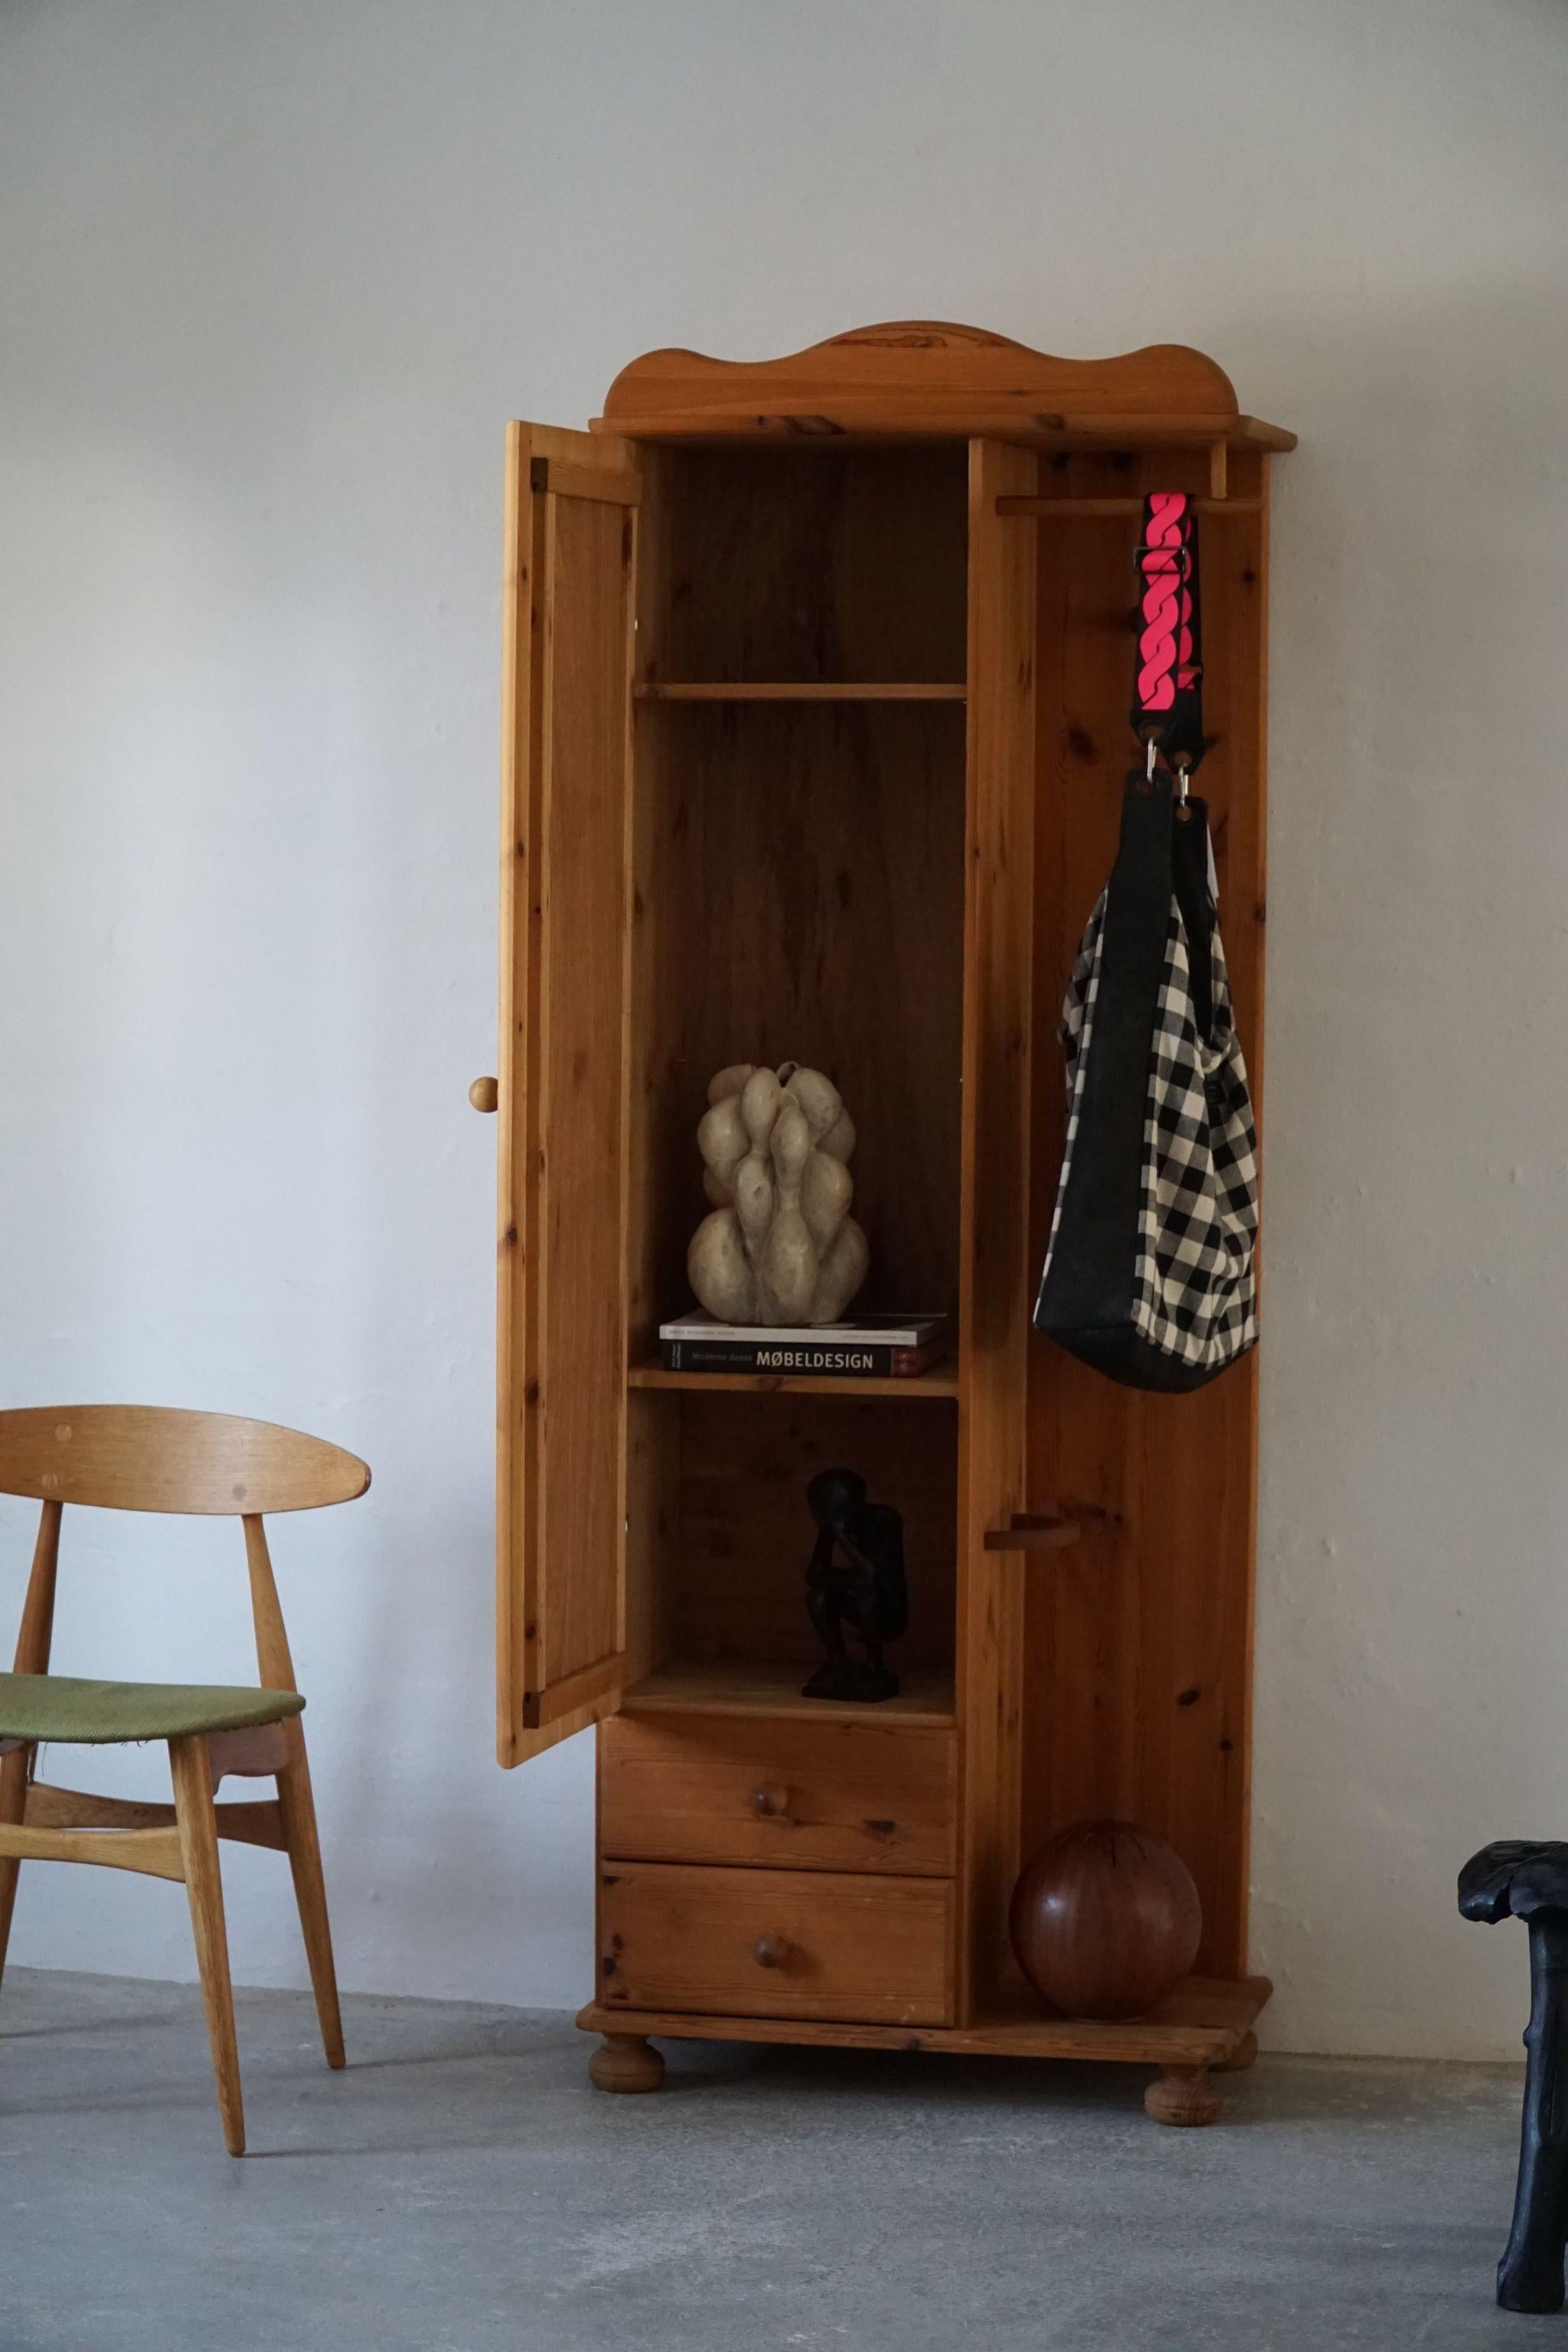 Fine cabinet in solid pine with a mirror, perfectly suited for a bedroom or entré. Made in Denmark, ca 1980s.

A great brutalist object, perfect for the modern interior. A warm colour and patina that pair well with the minimalist scandinavian